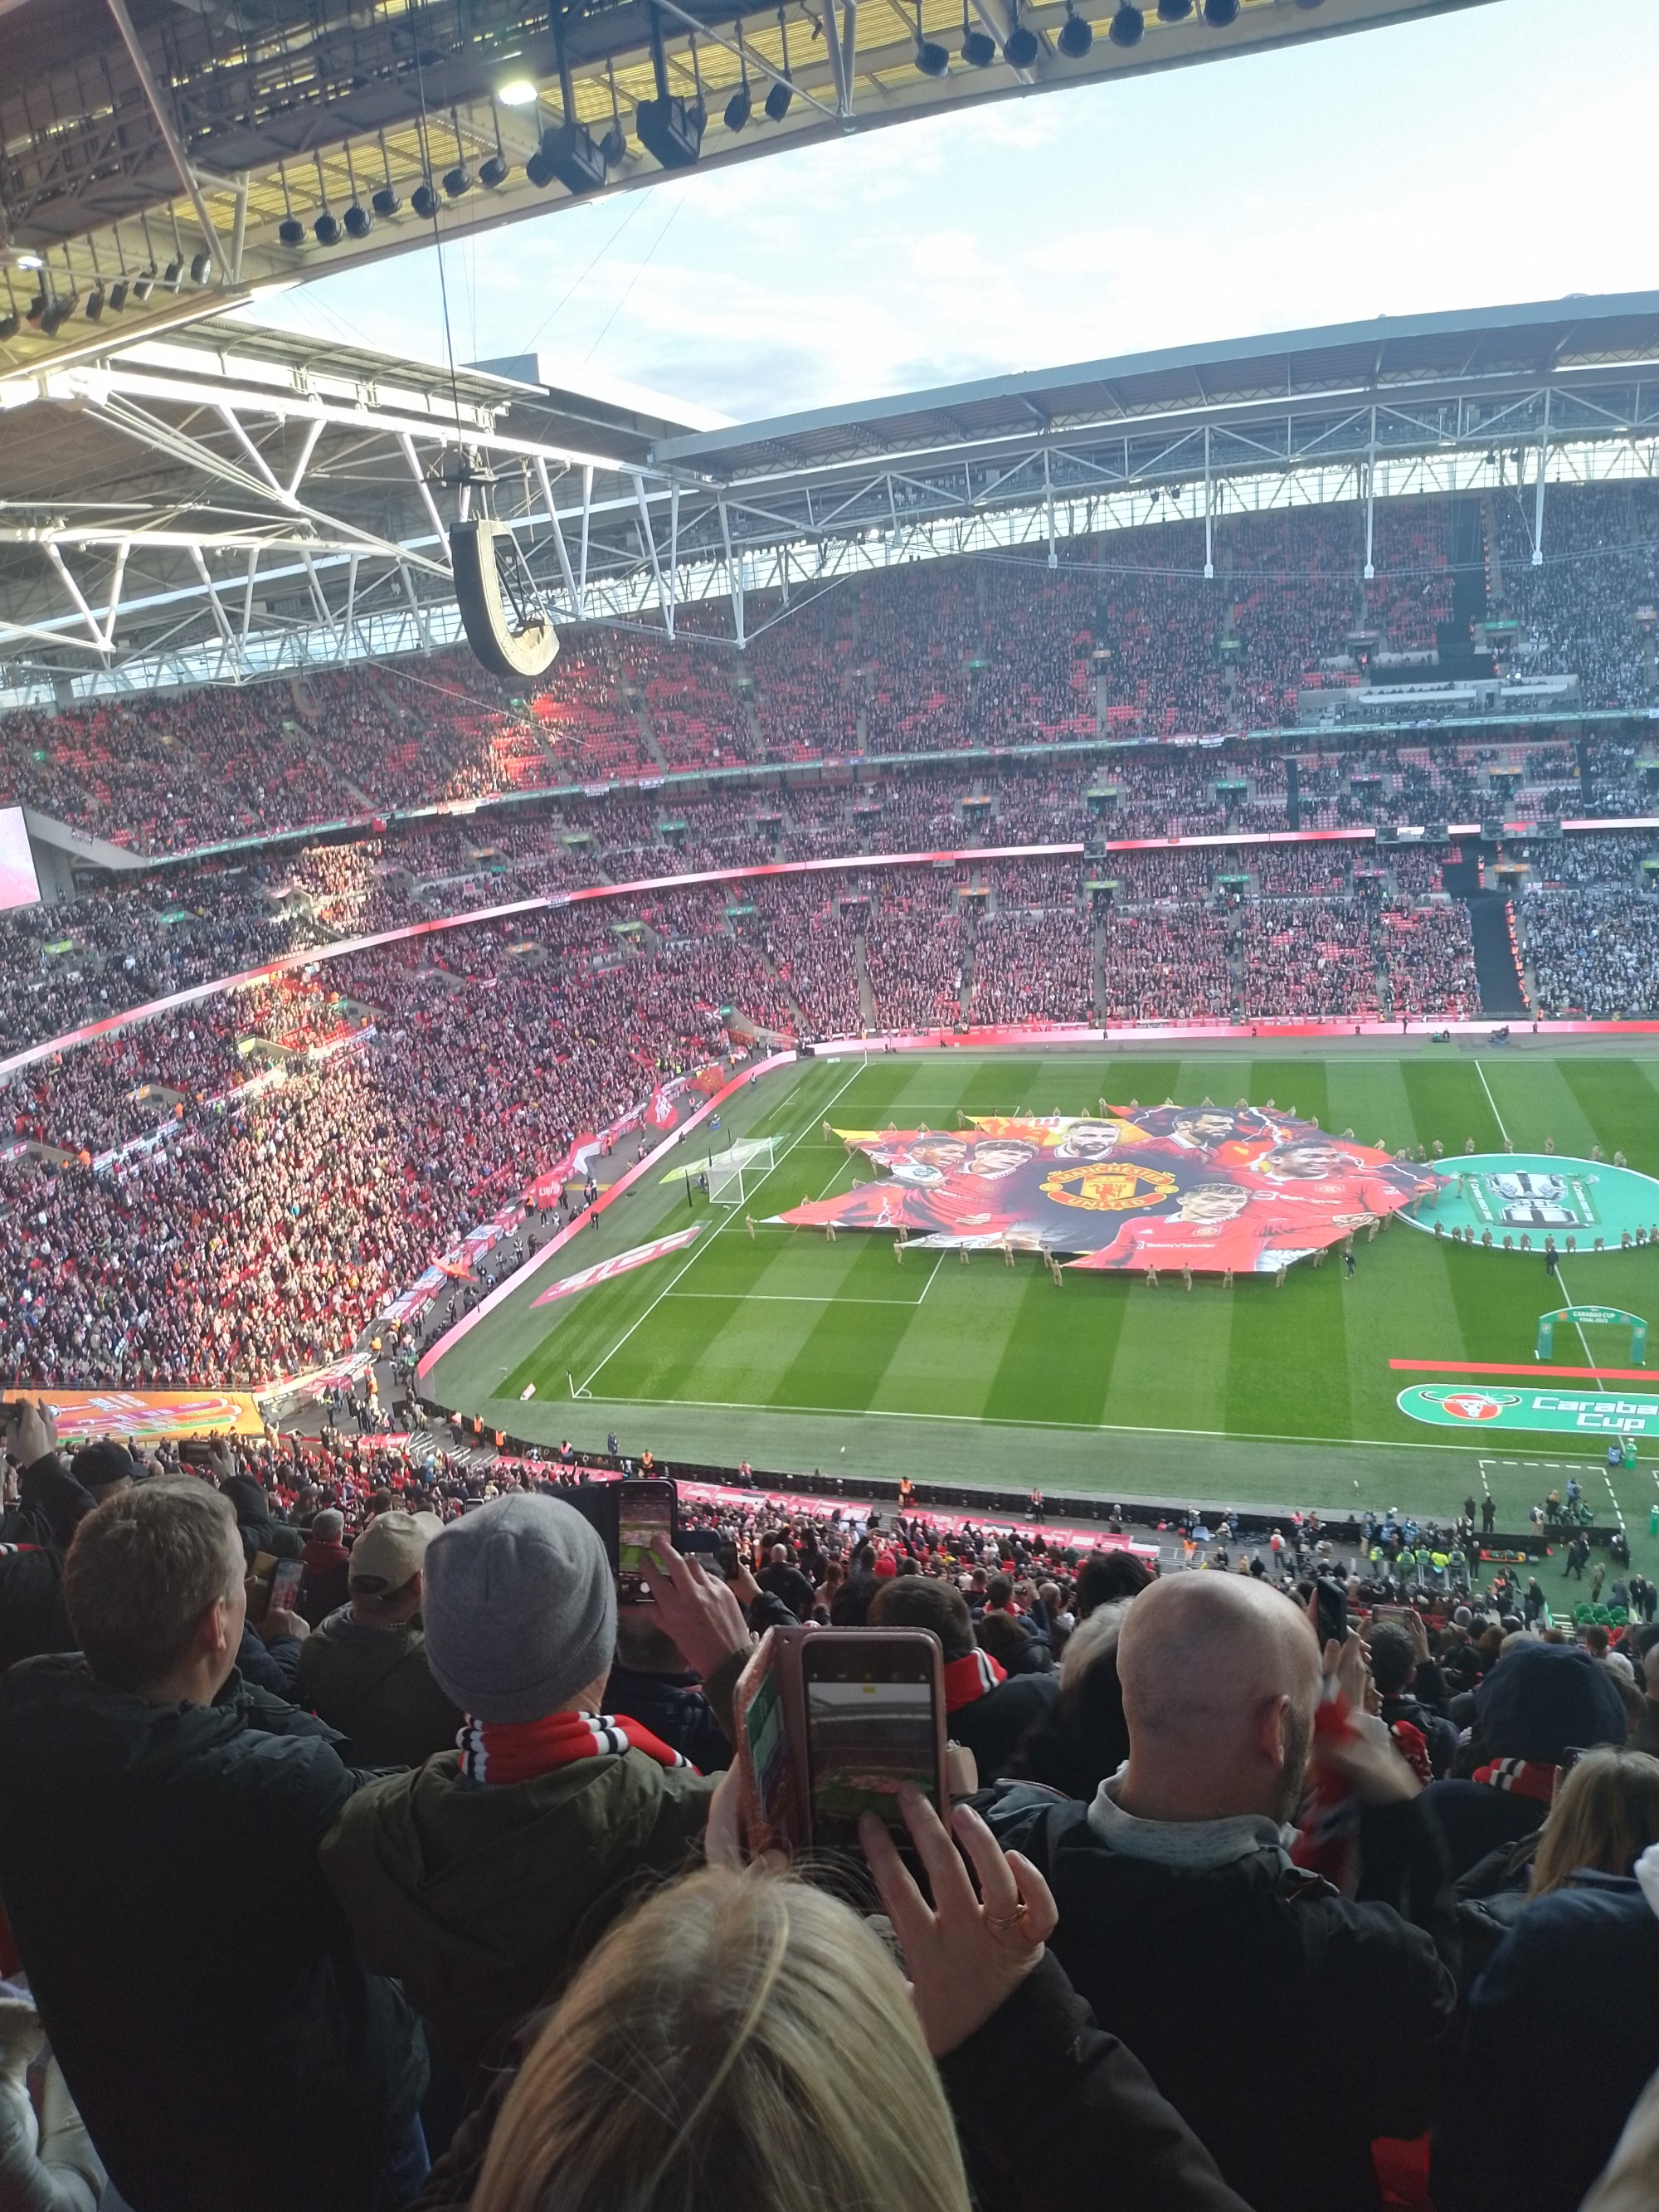 At Wembley Stadium England watching Man Utd v Newcastle United in the Carabao Cup Final 